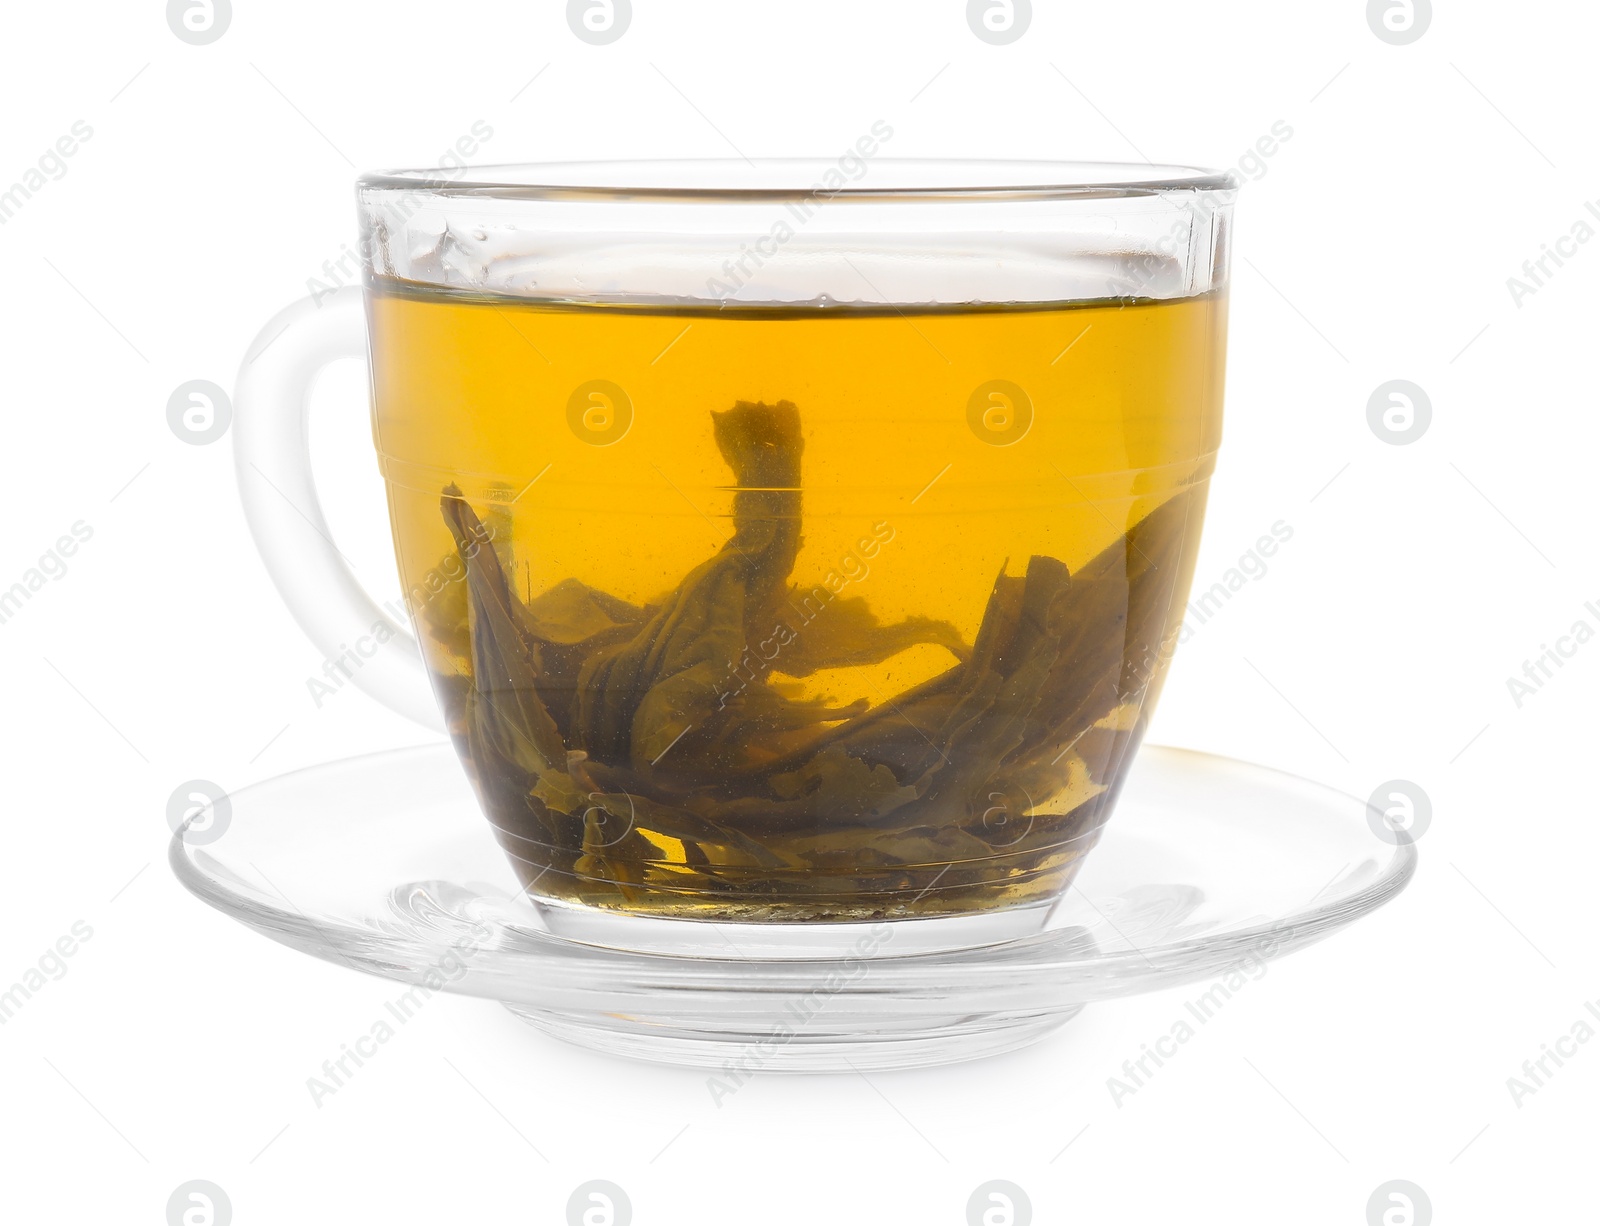 Photo of Fresh green tea in glass cup, leaves and saucer isolated on white